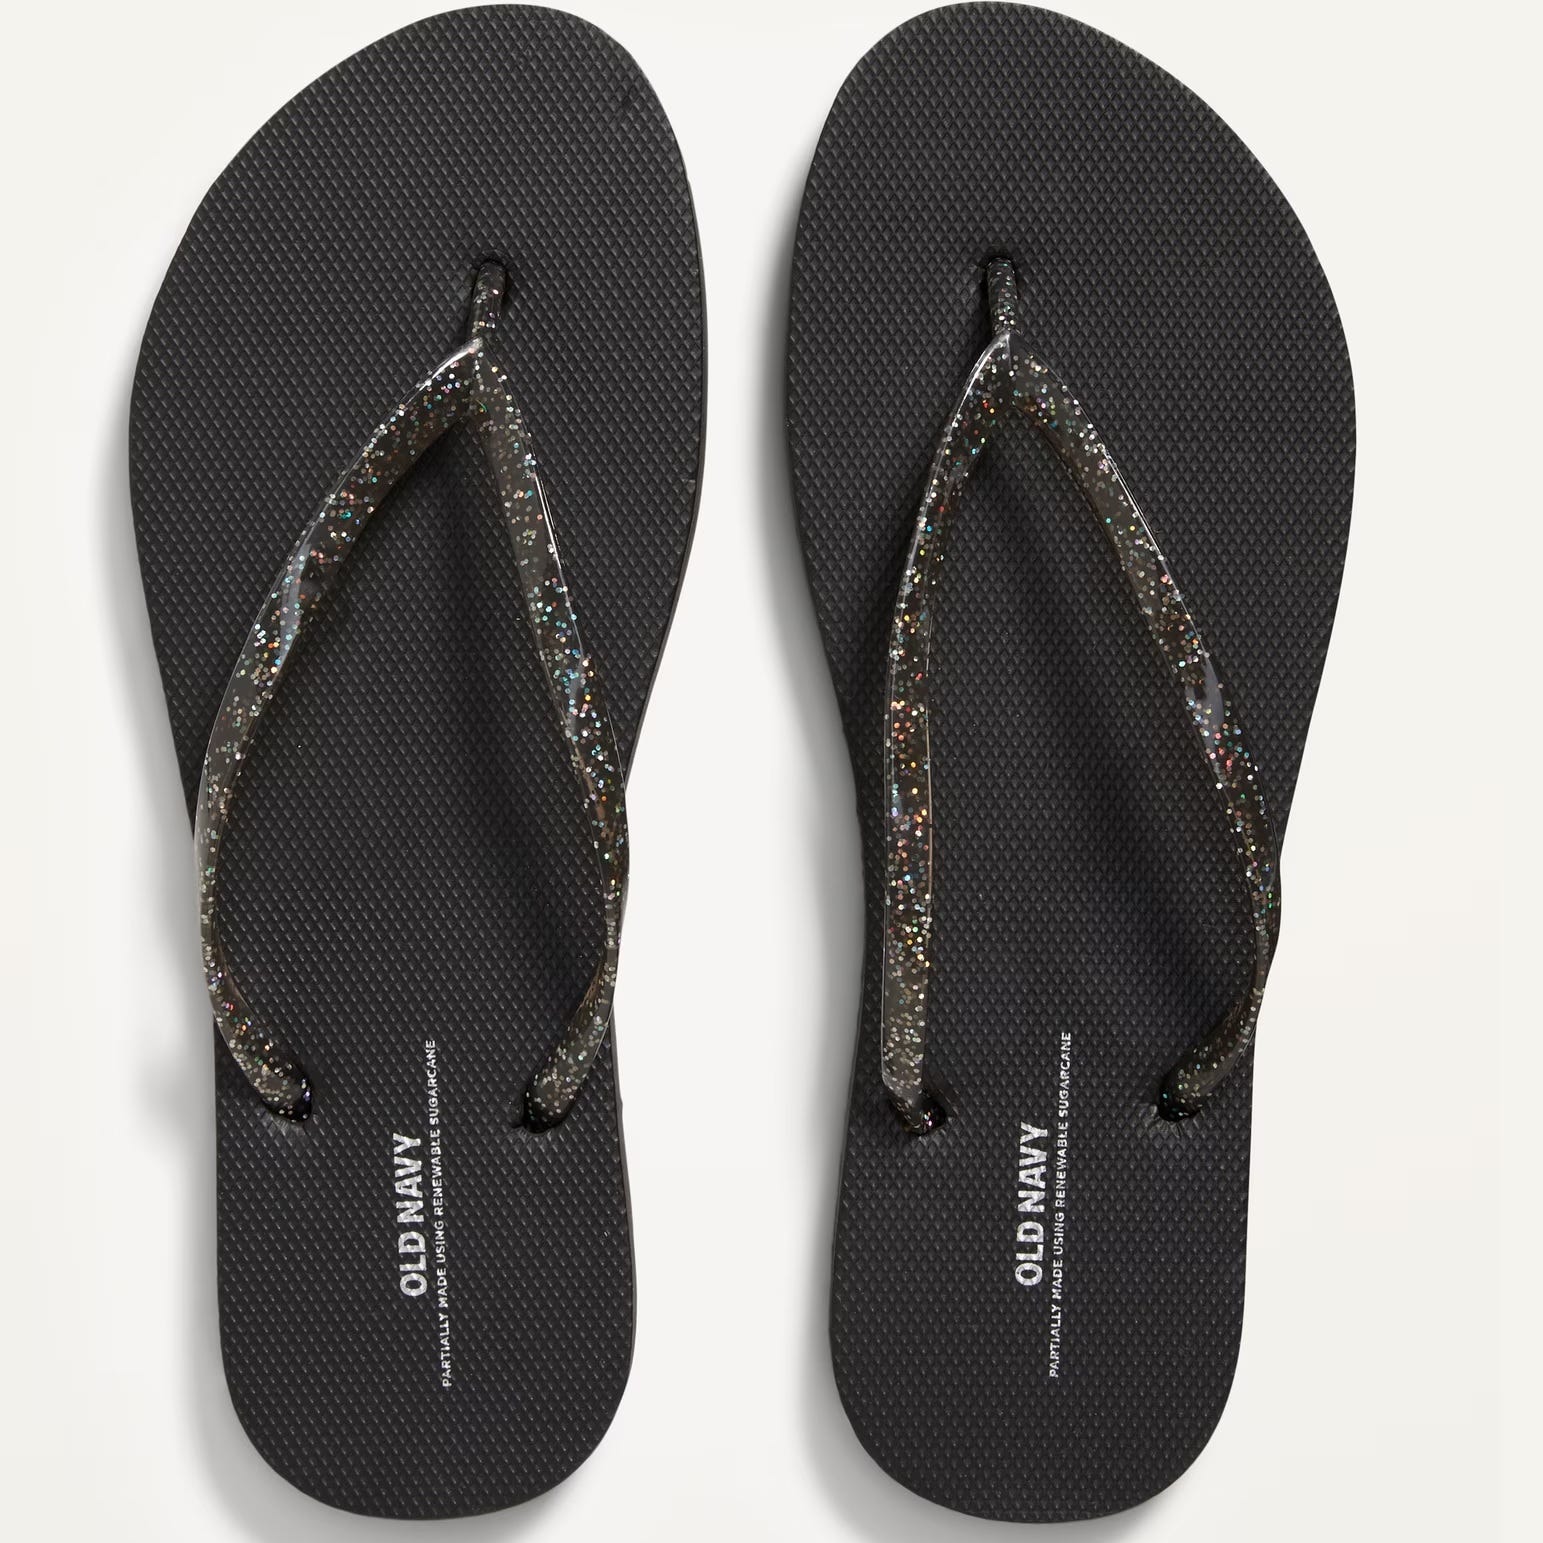 A pair of black flip-flops with glitter-embedded straps.